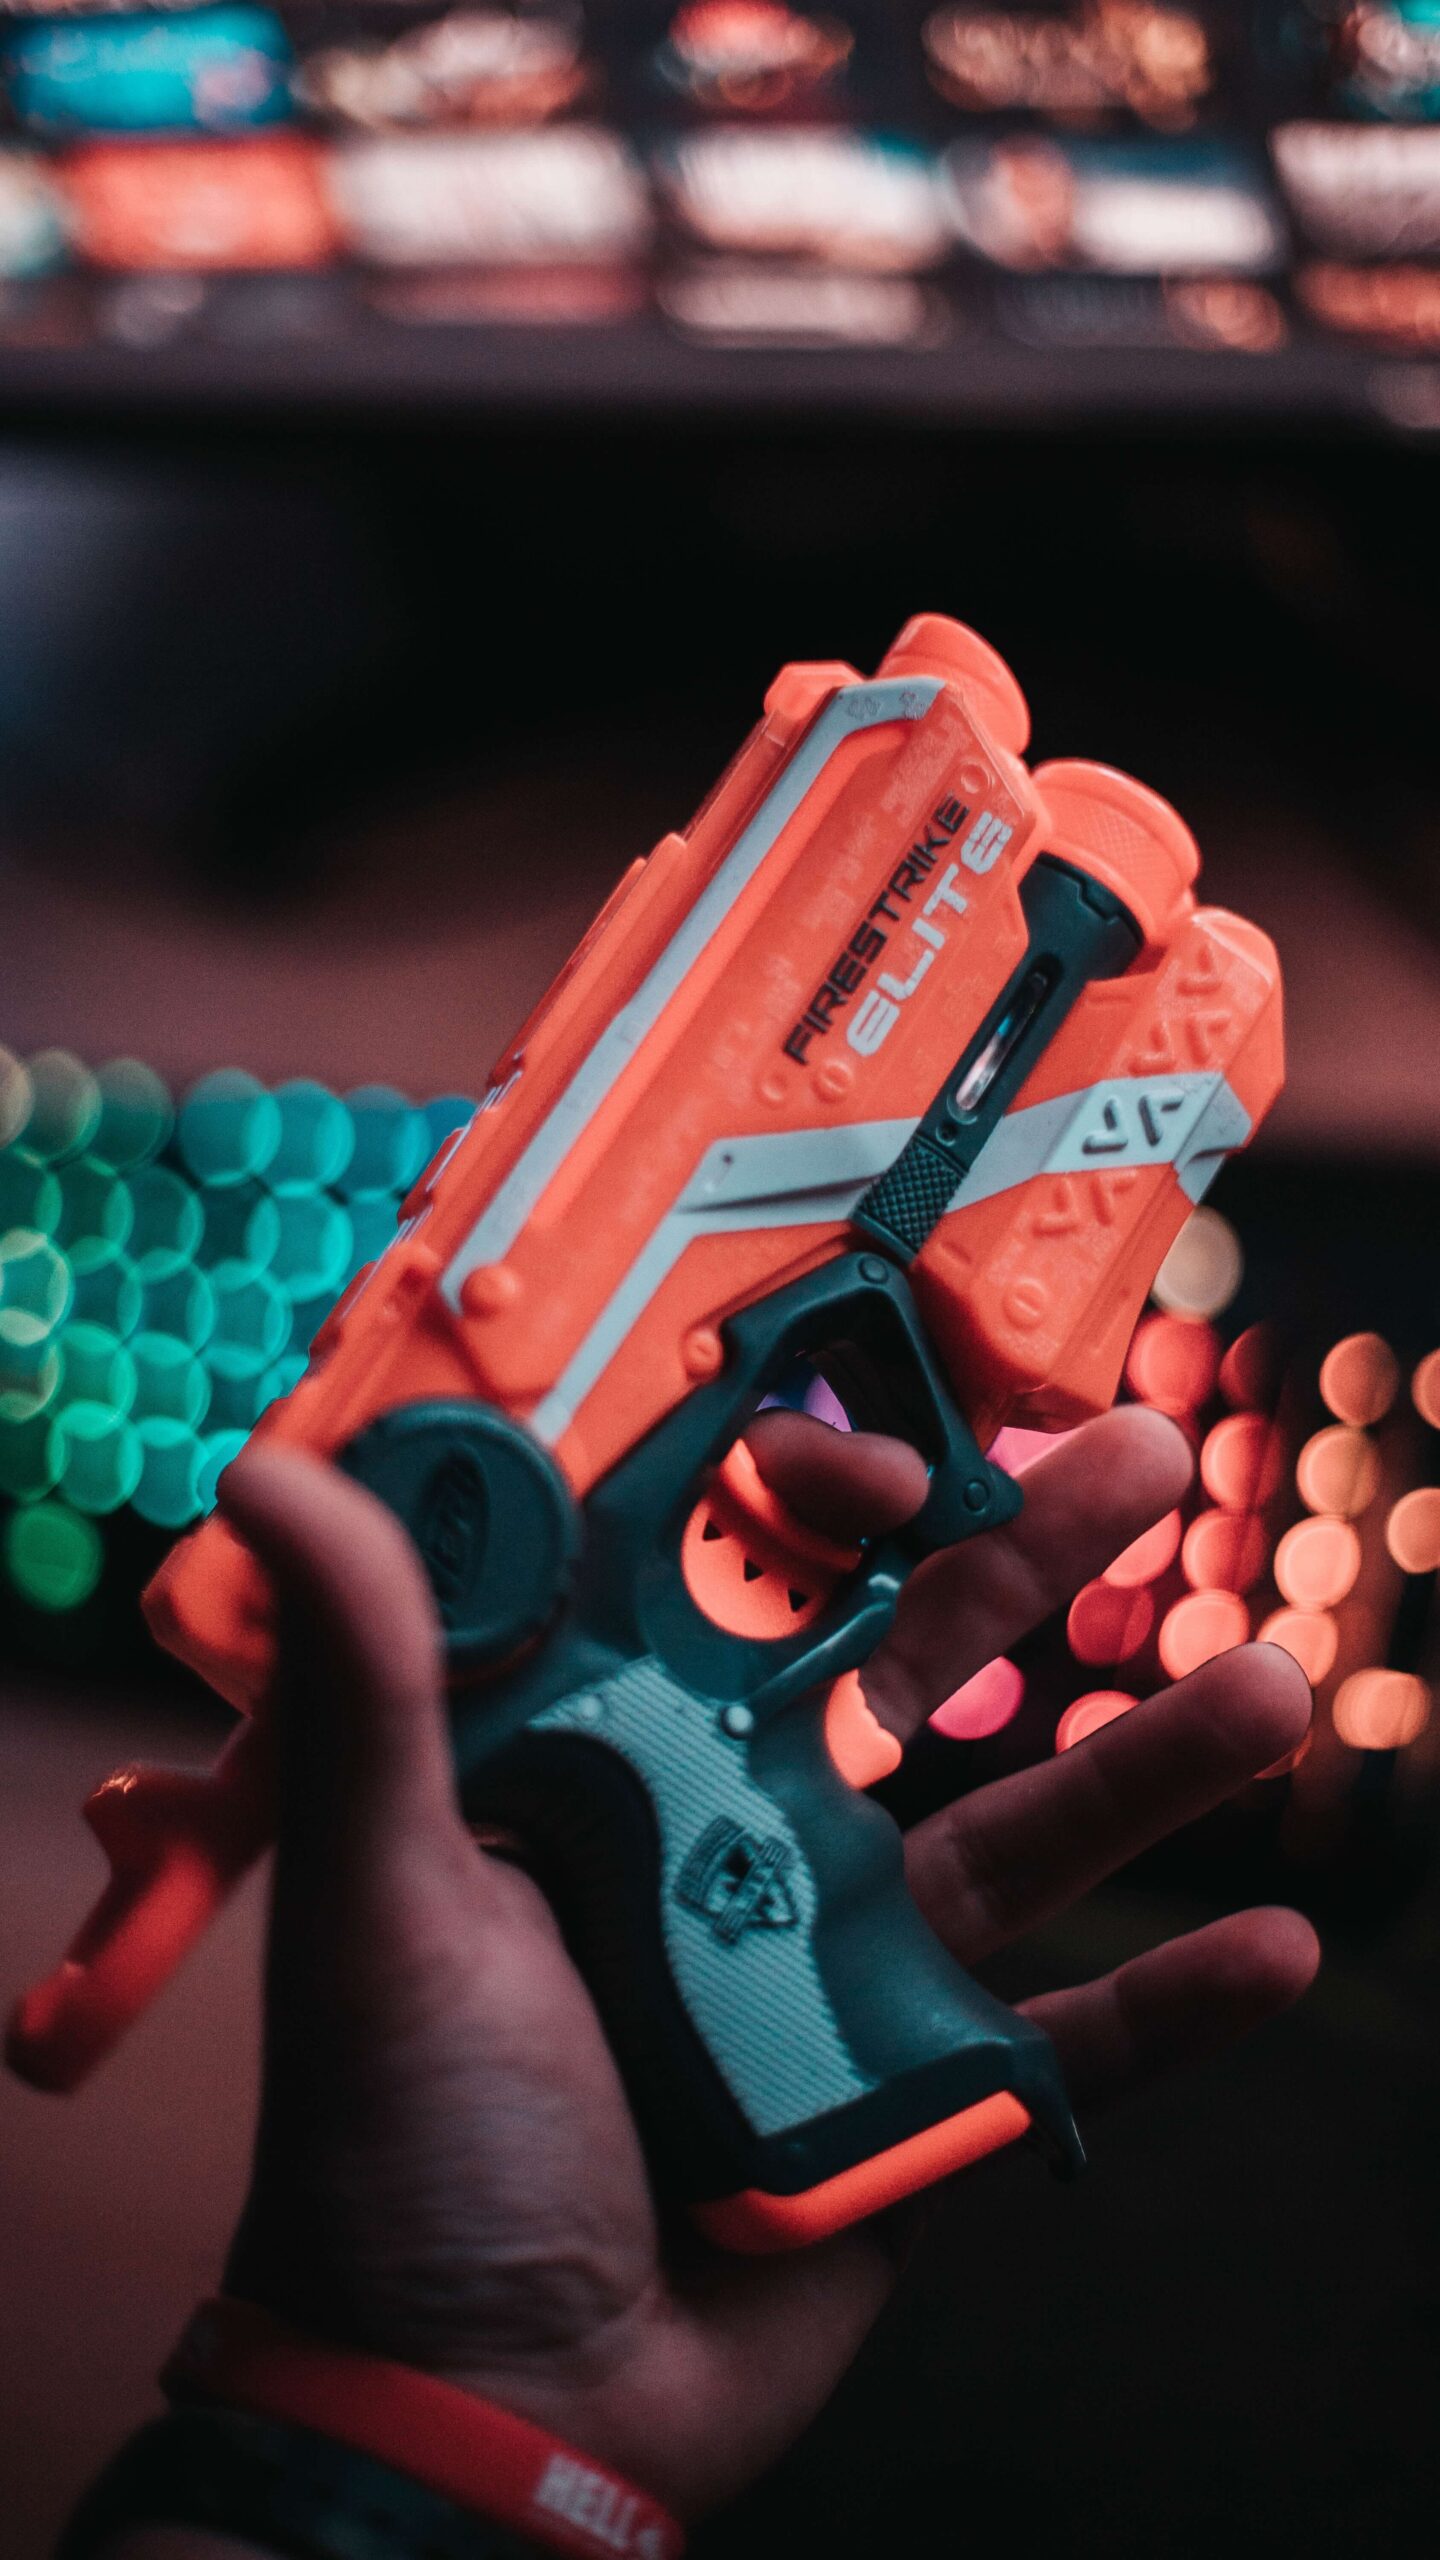 Take Your Team to Calgary's Ultimate Nerf Battleground for a Thrilling Team-Building Experience at the Grizzly Classic Men's Artistic Gymnastics Competition.